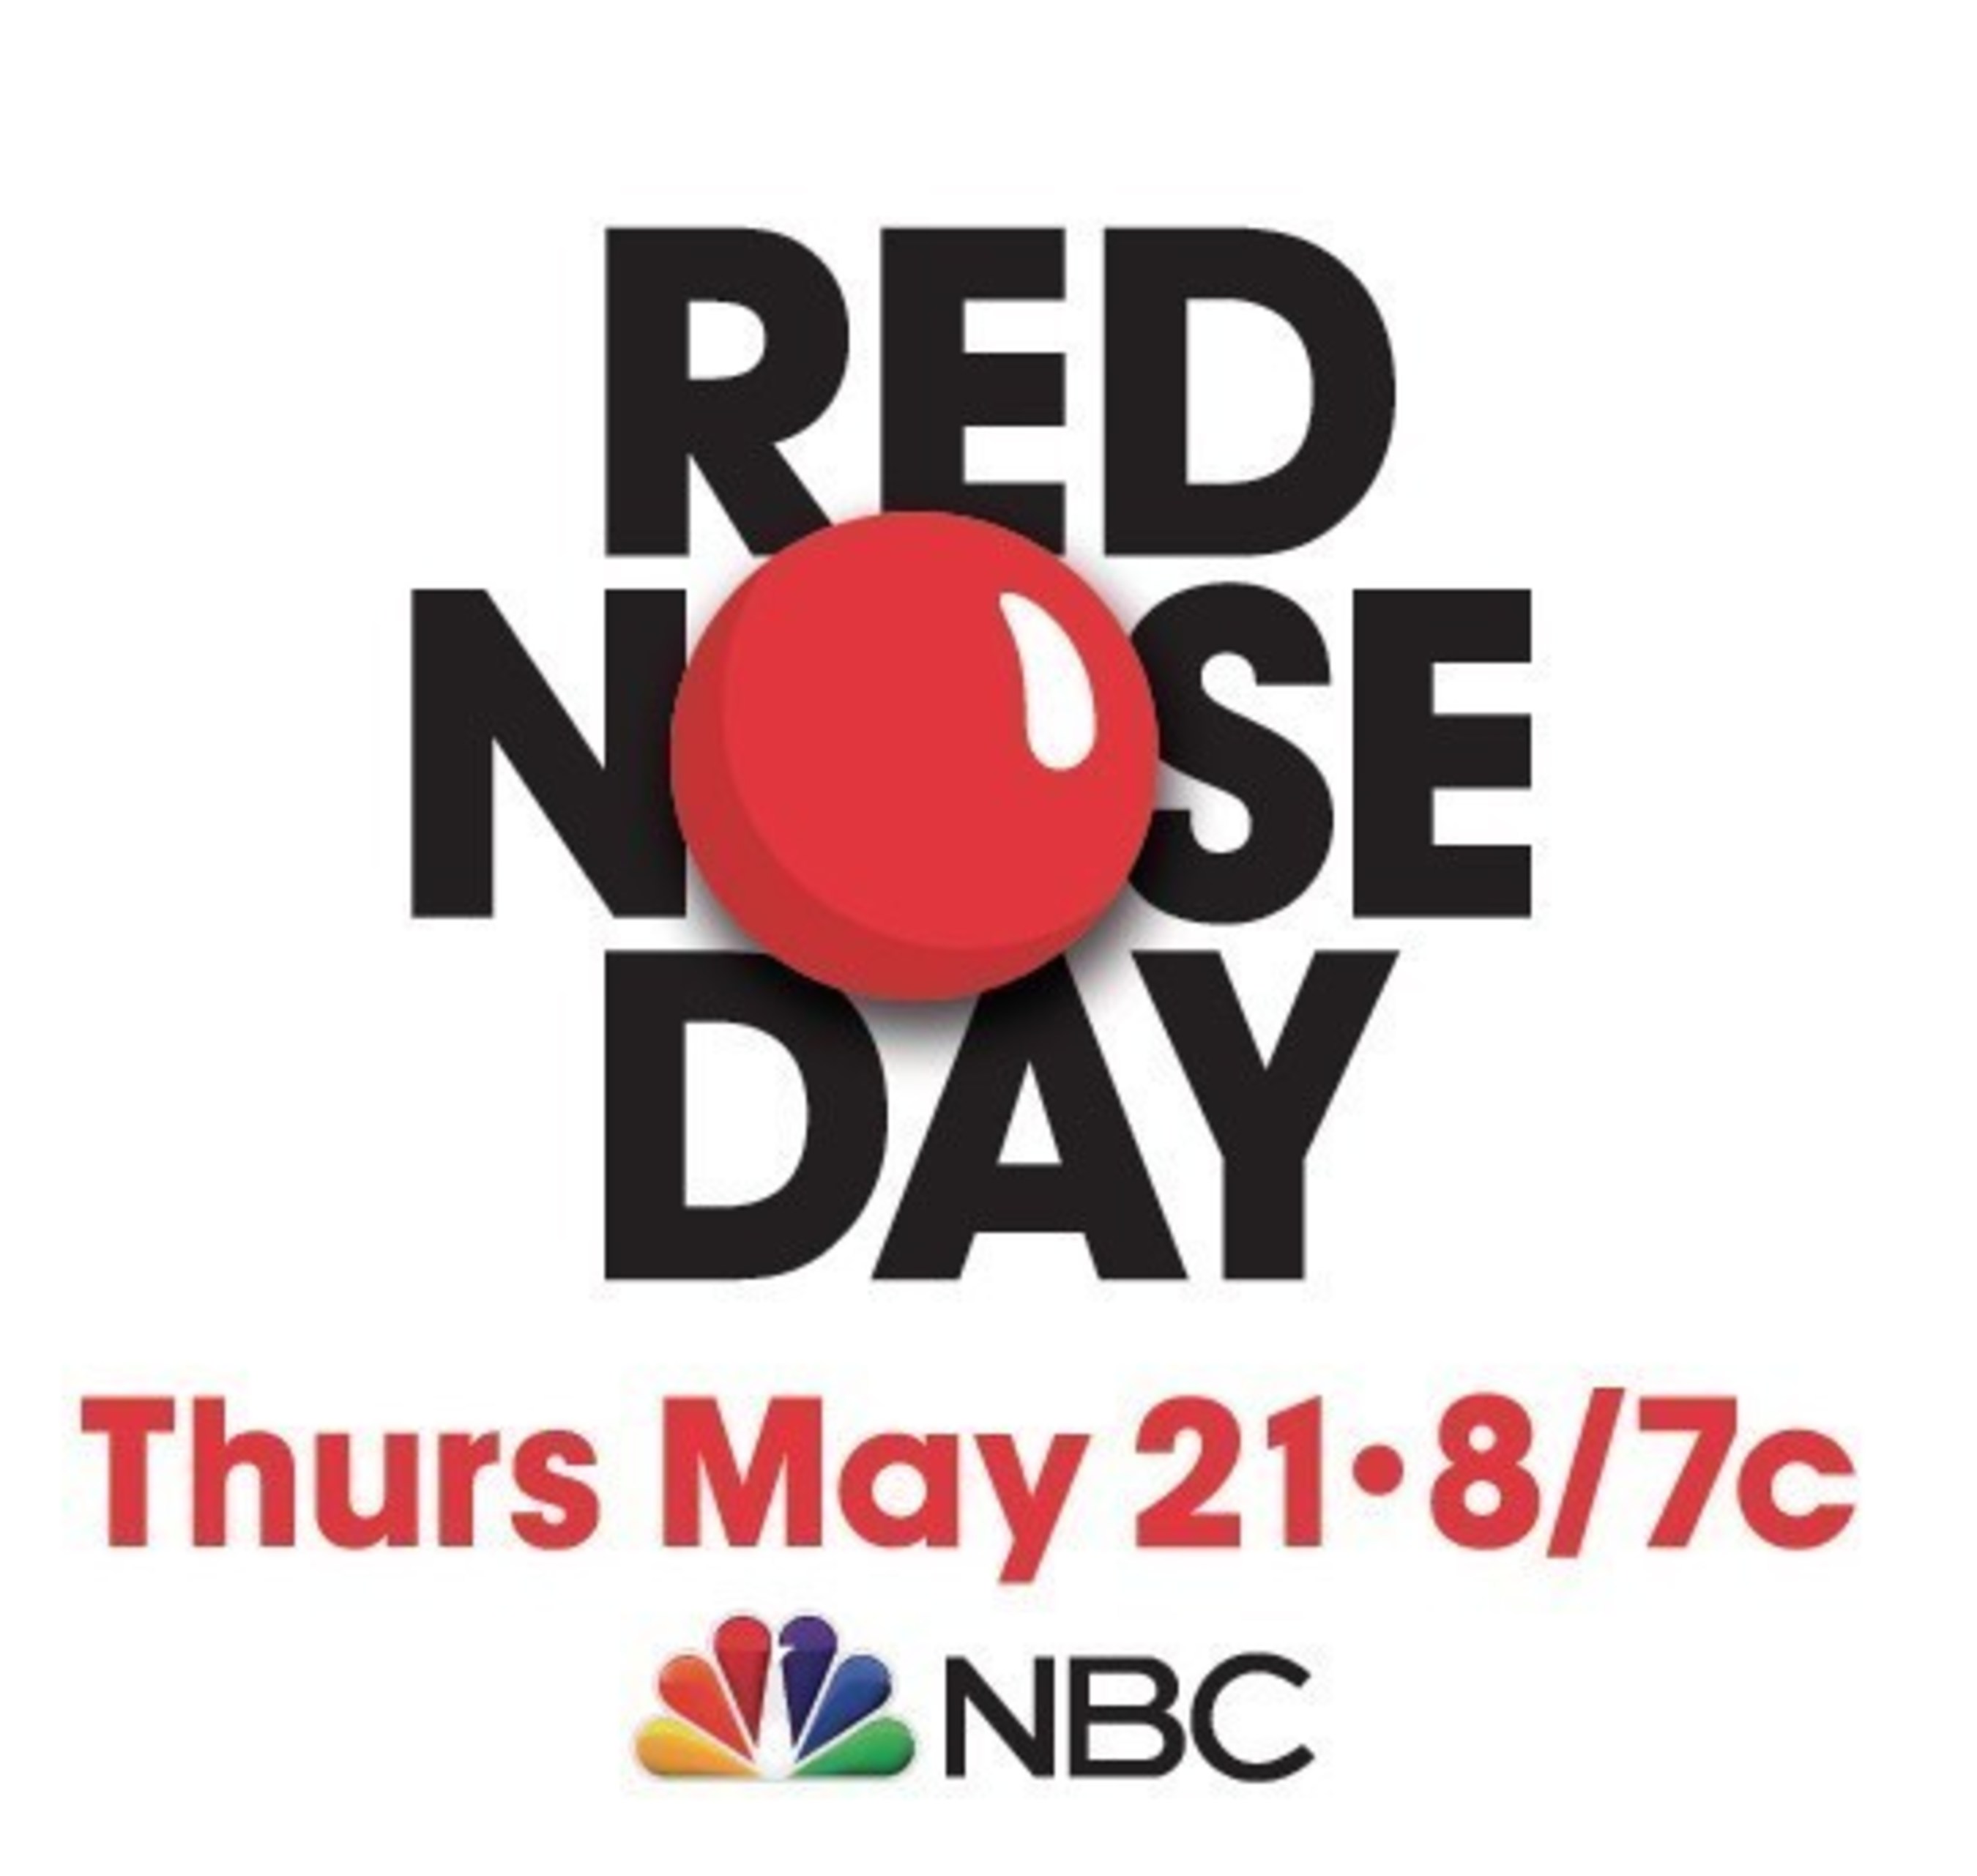 As the exclusive retail partner of the first Red Nose Day to be celebrated in America, Walgreens is raising funds to benefit children and young people in poverty and champion their right to be happy and healthy.